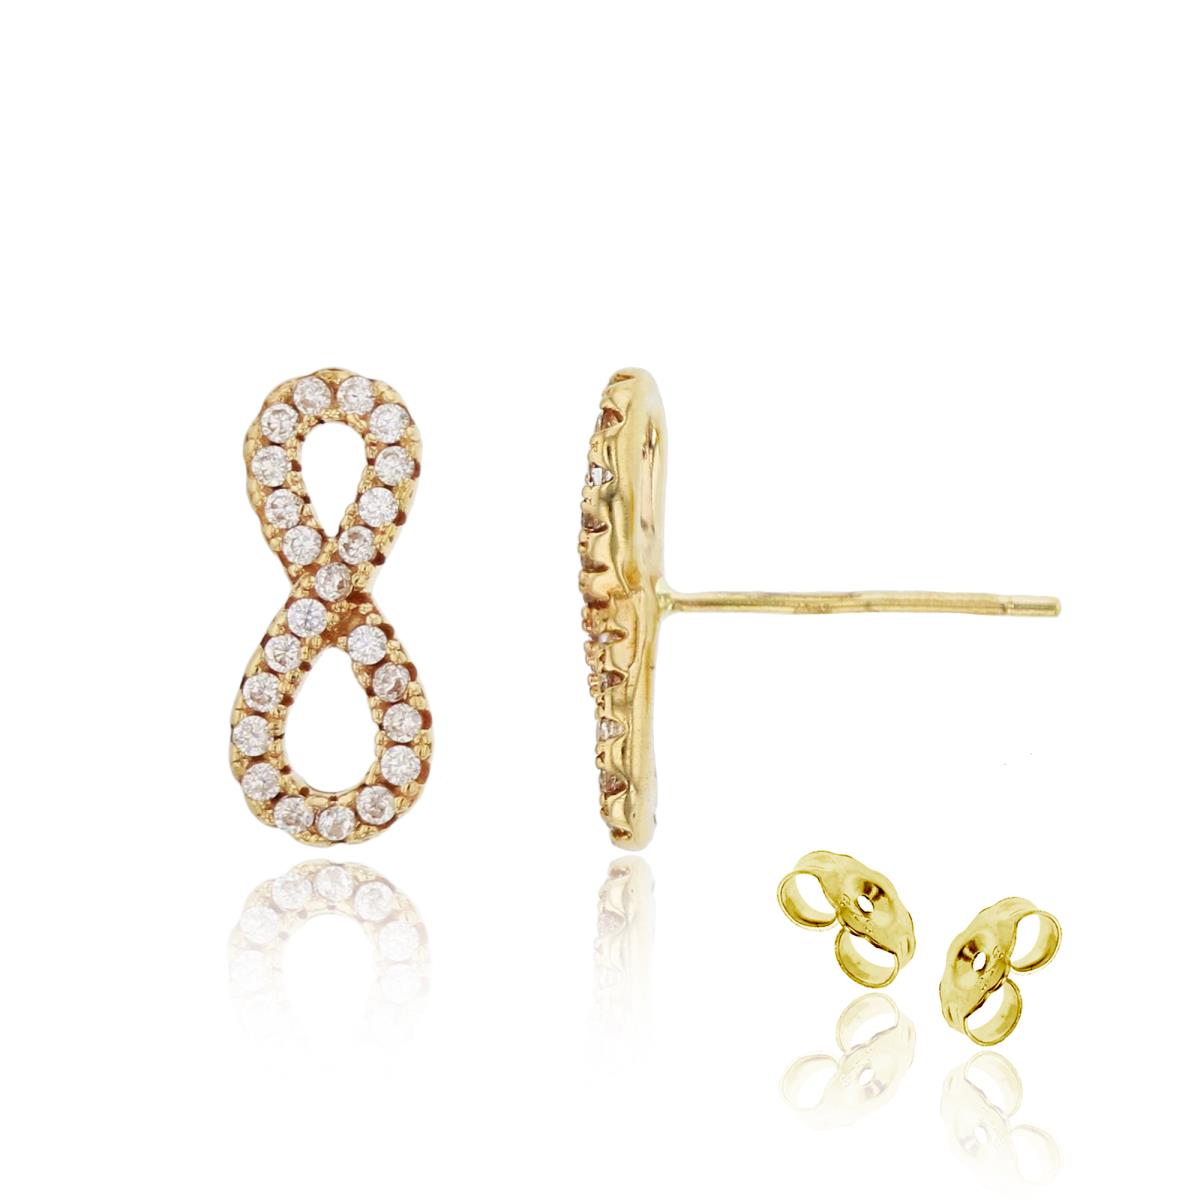 10K Yellow Gold Micropave Infinity Stud Earring with 4.5mm Clutch